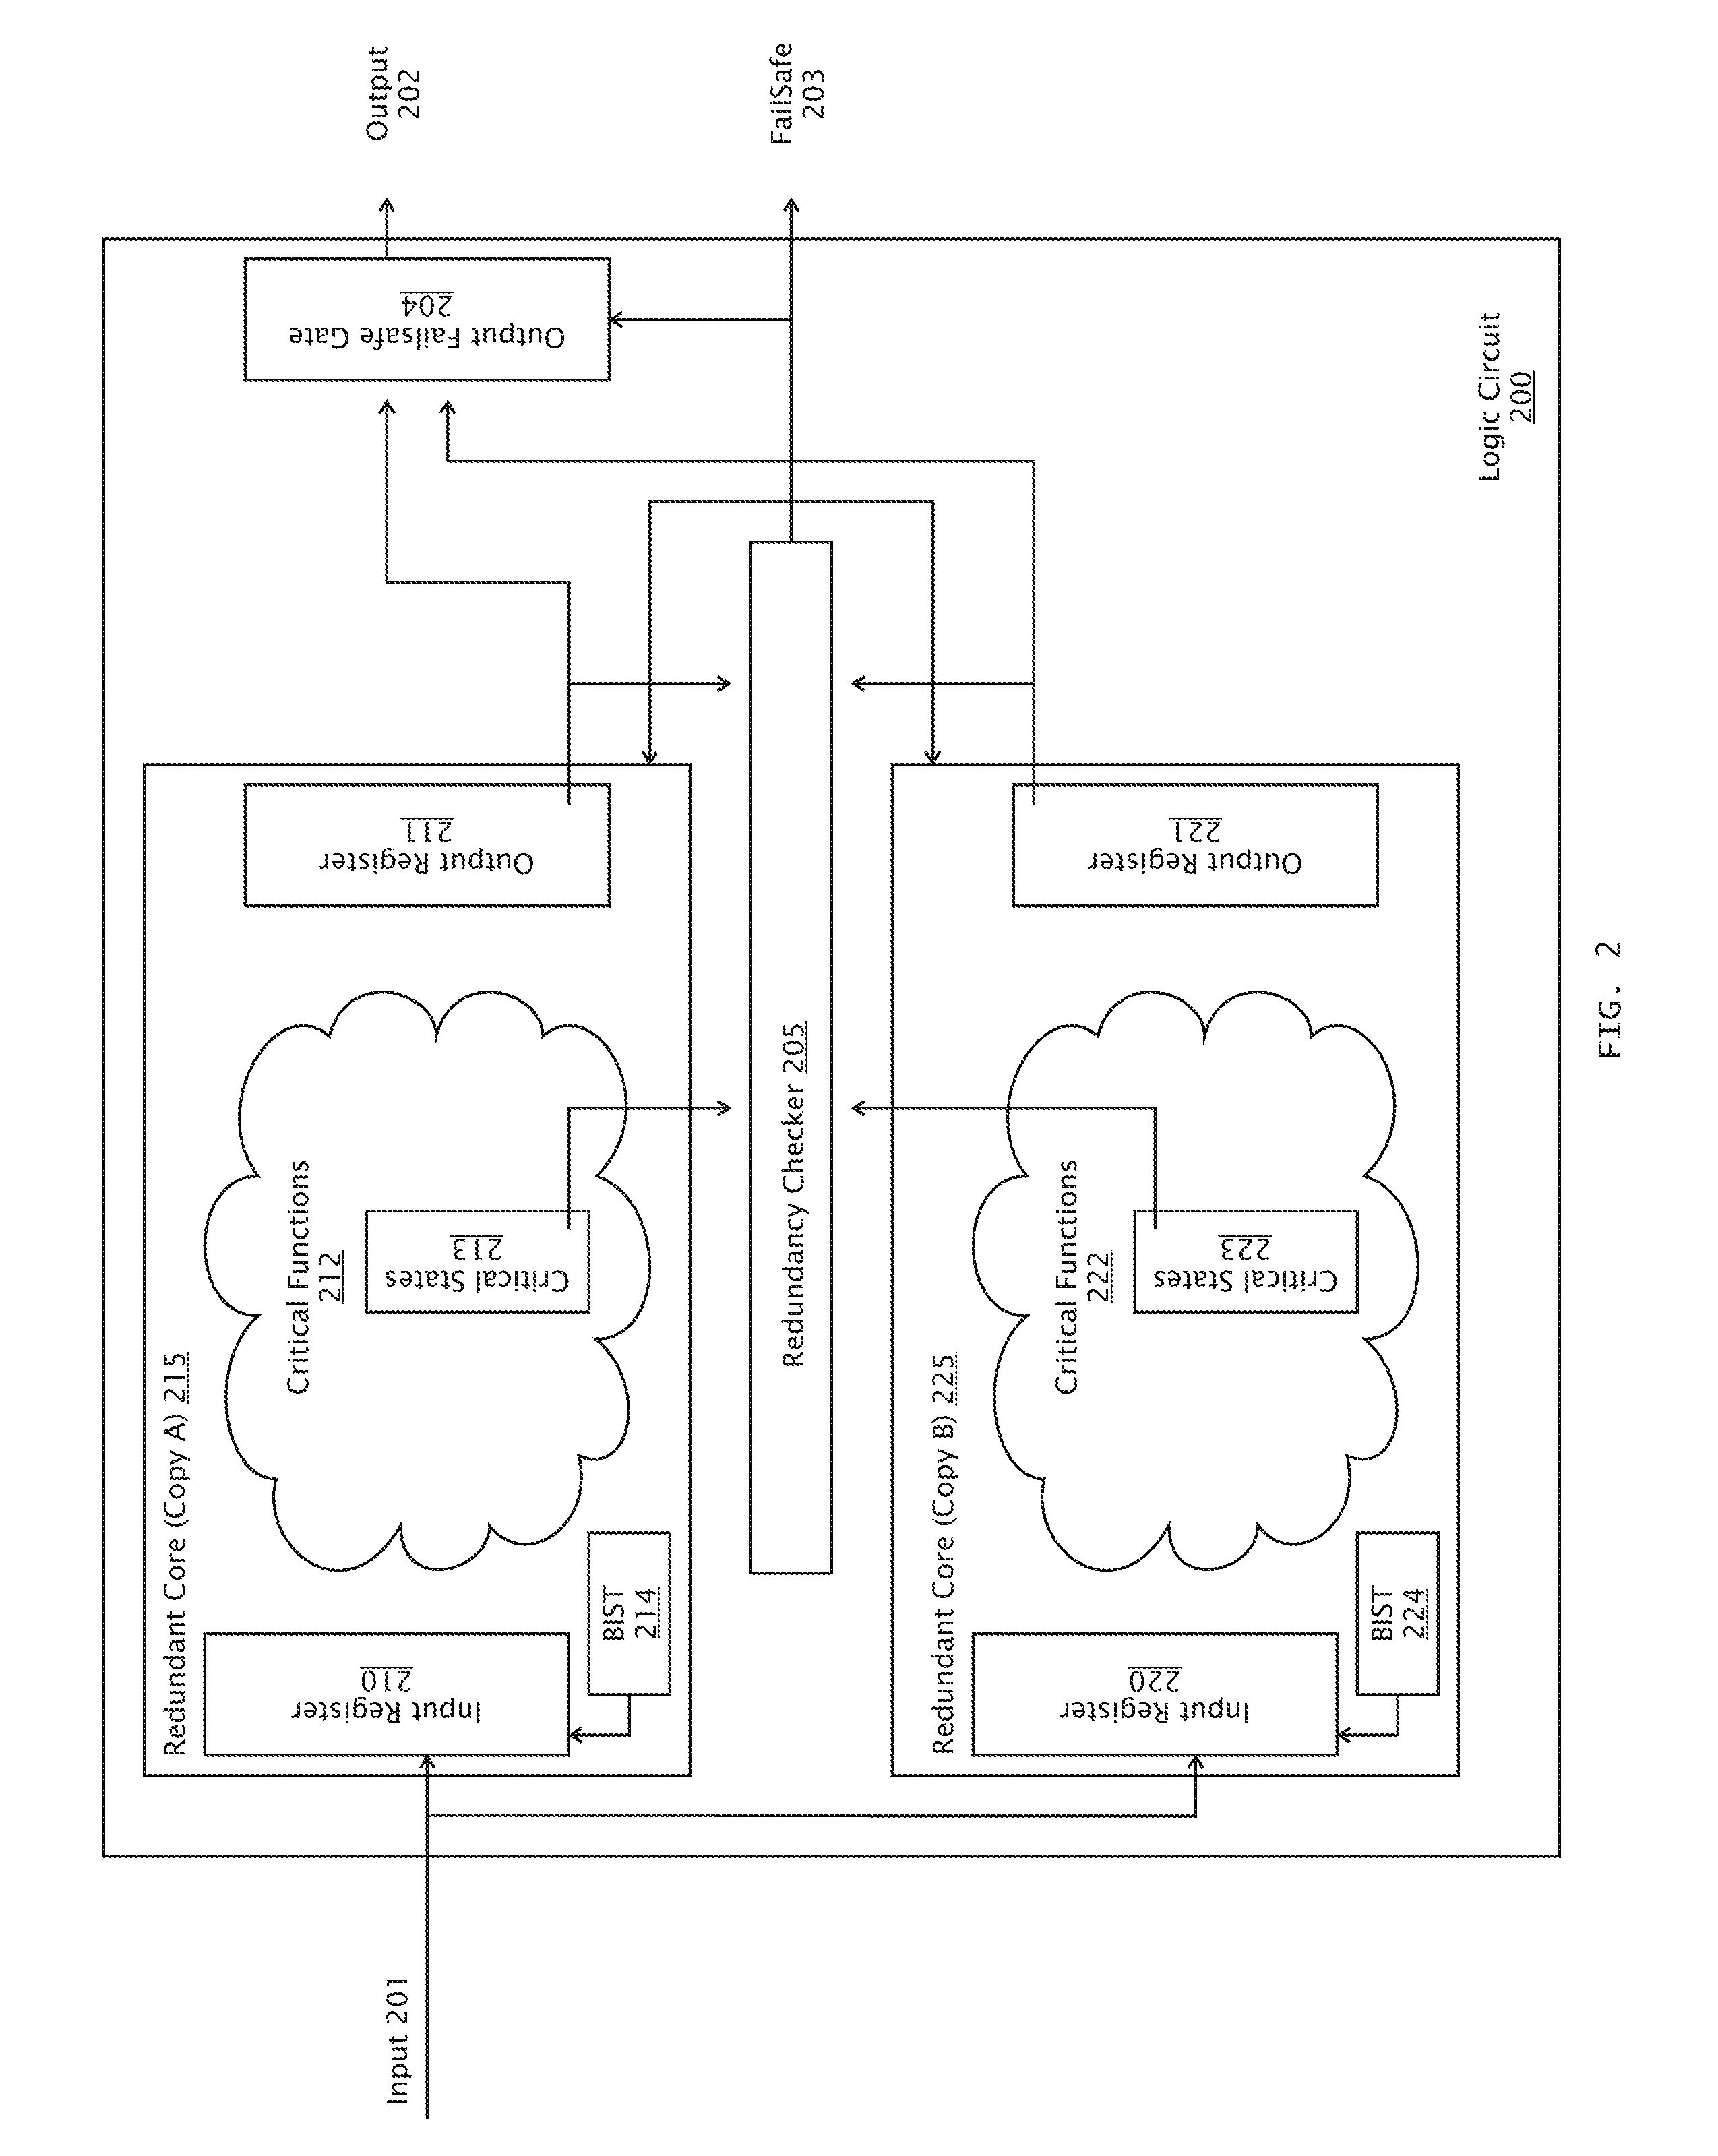 Failure detection and mitigation in logic circuits